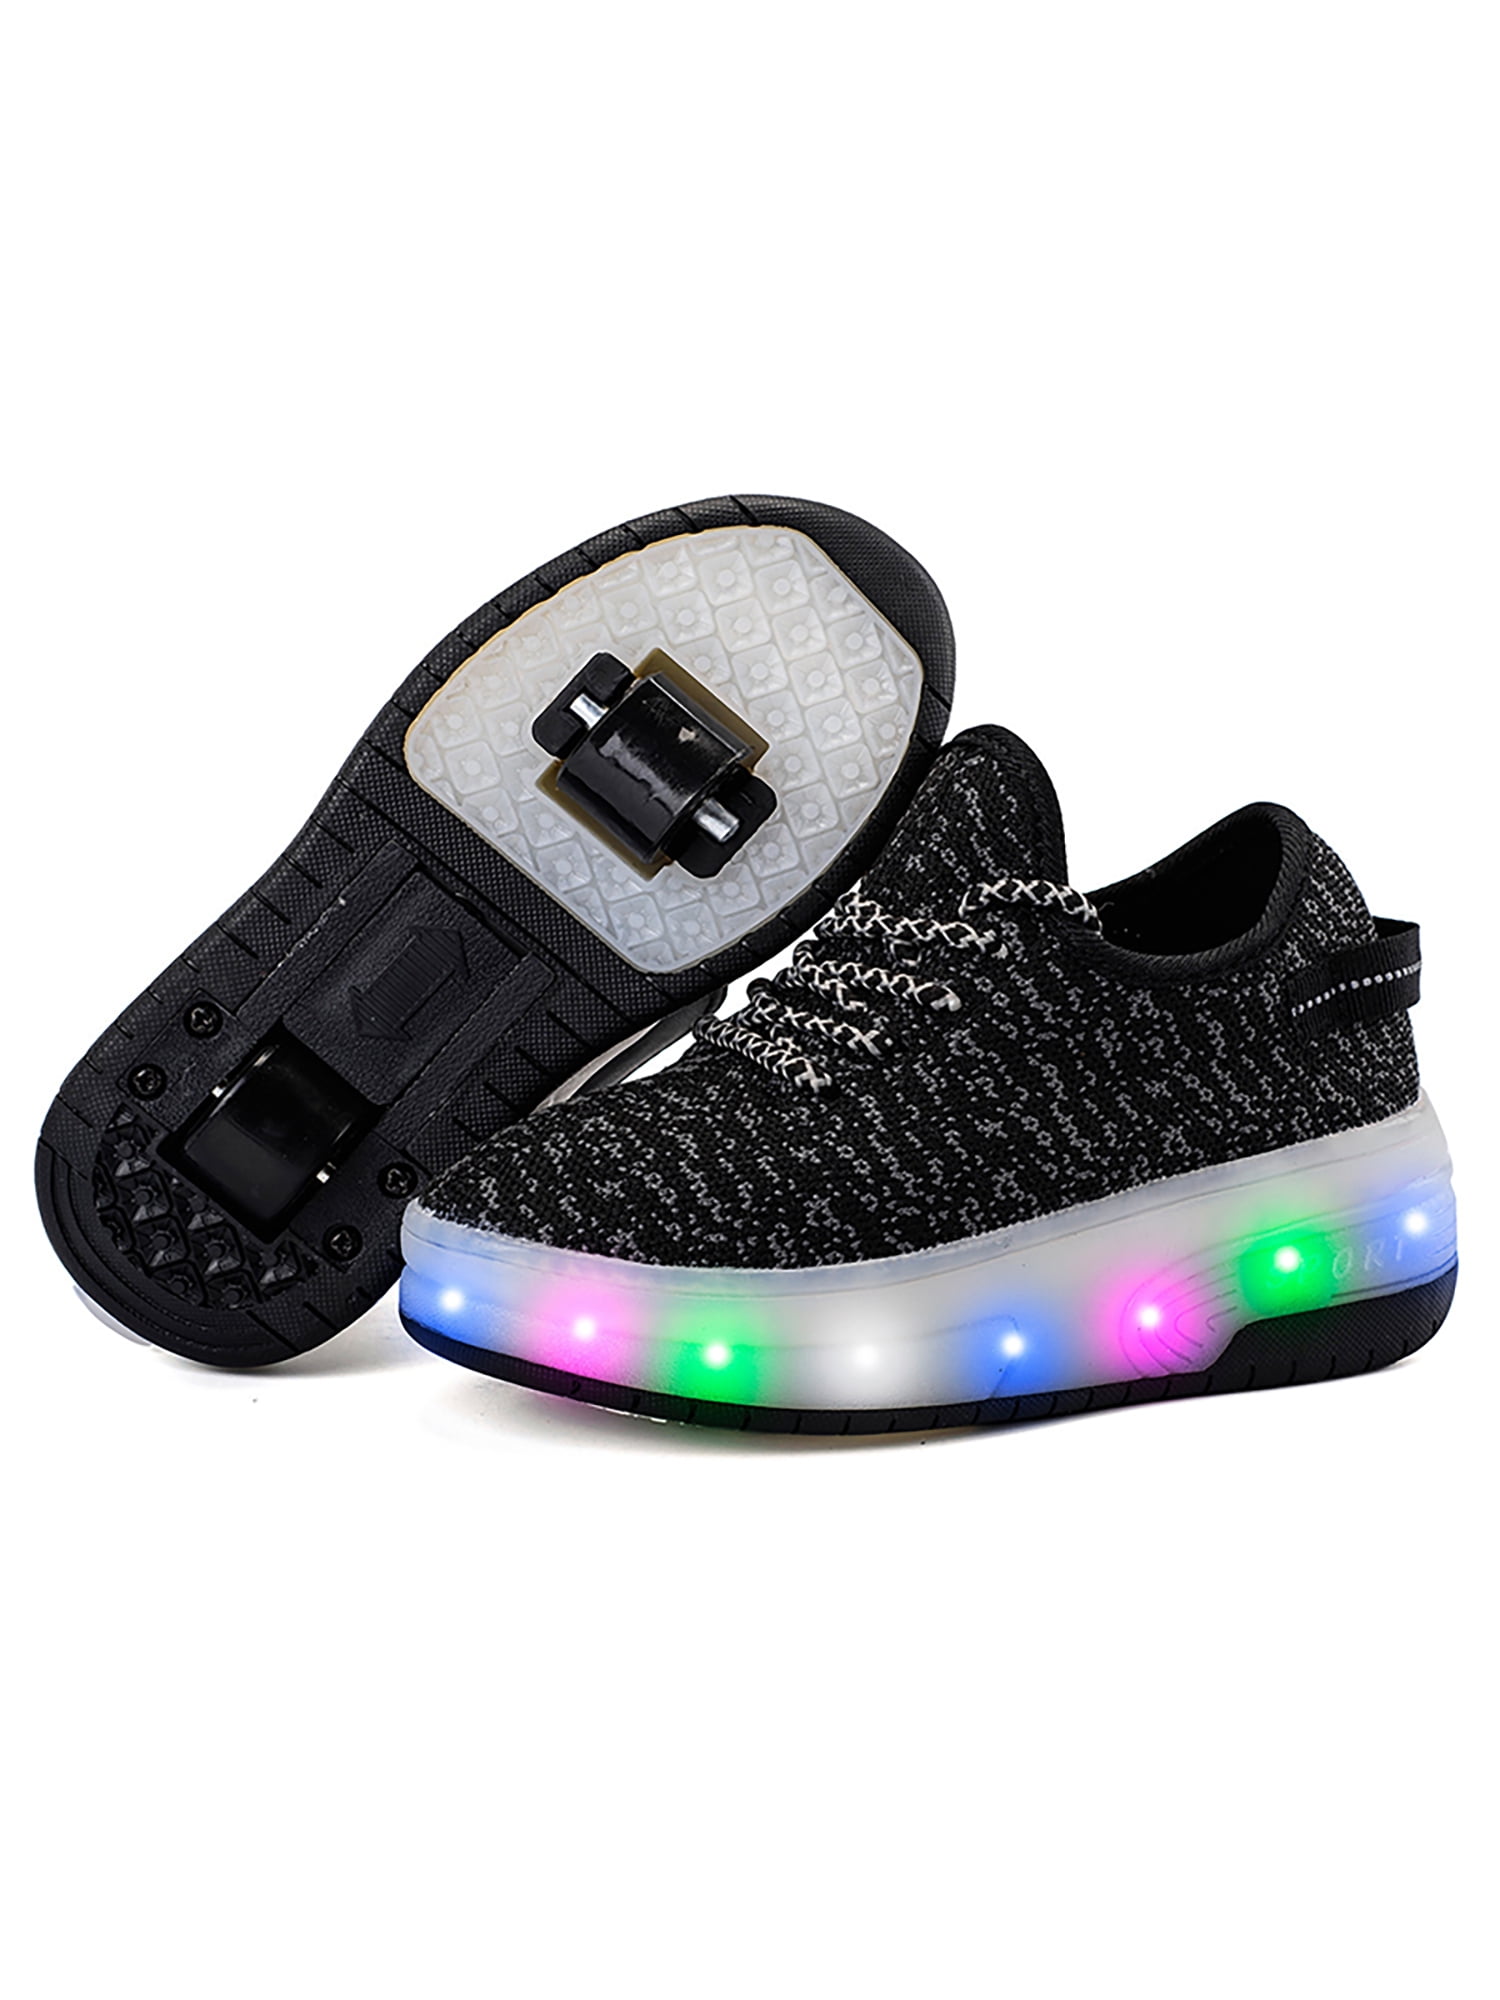 Linckoo Boys Girls LED Roller Skates Shoes with Wheels LED Lights Luminous Trainers Double Wheel Technical Skateboarding Gymnastics Shoes for Unisex Kids 